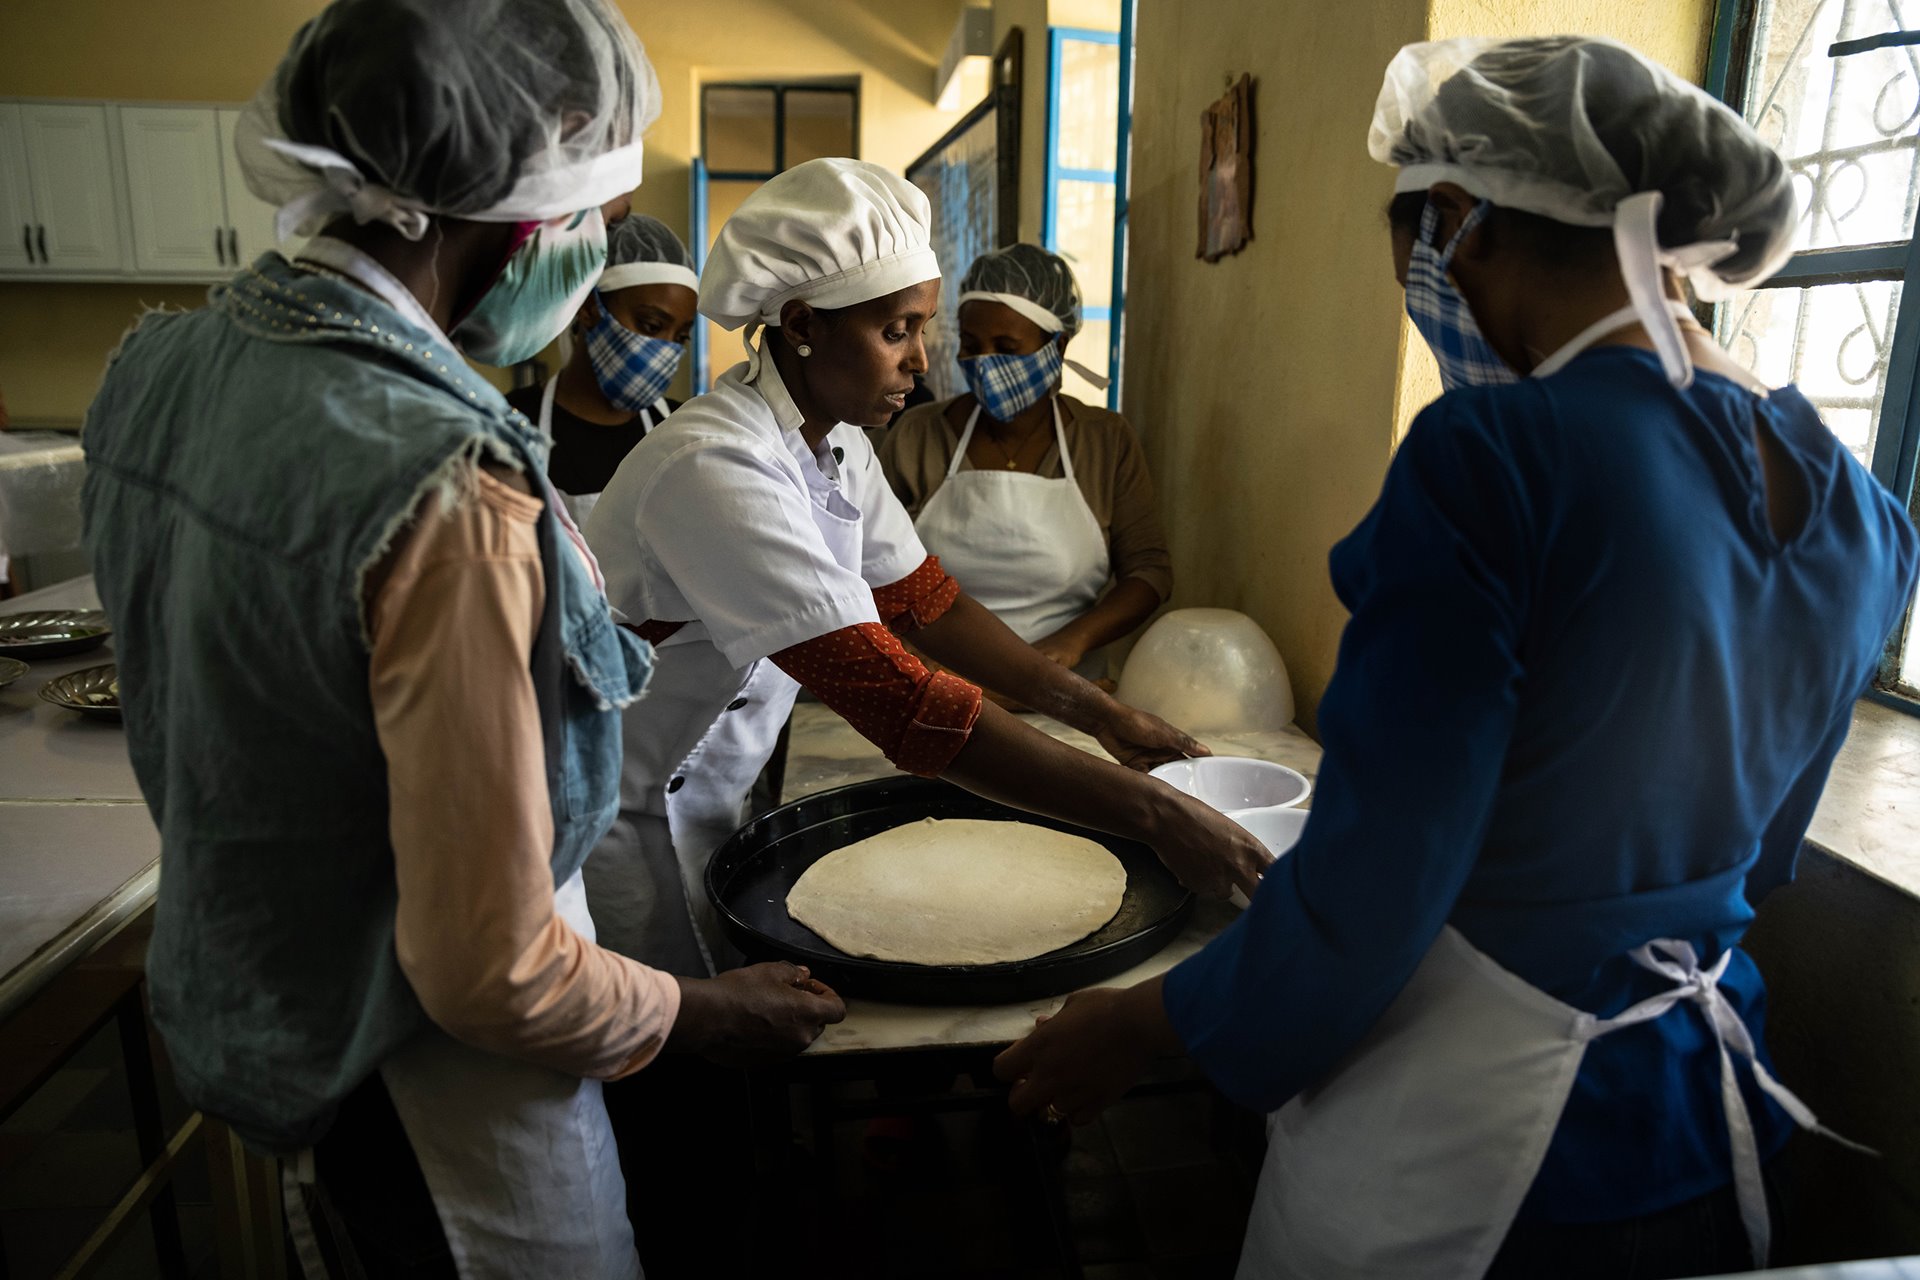 Bedla Salomon (center), cooking instructor, shows her students how to make pizza during a culinary class at the Daughters of Charity Training Center in Mekele, Ethiopia. The Daughters of Charity provide psychological support and job training to survivors of sexual violence.